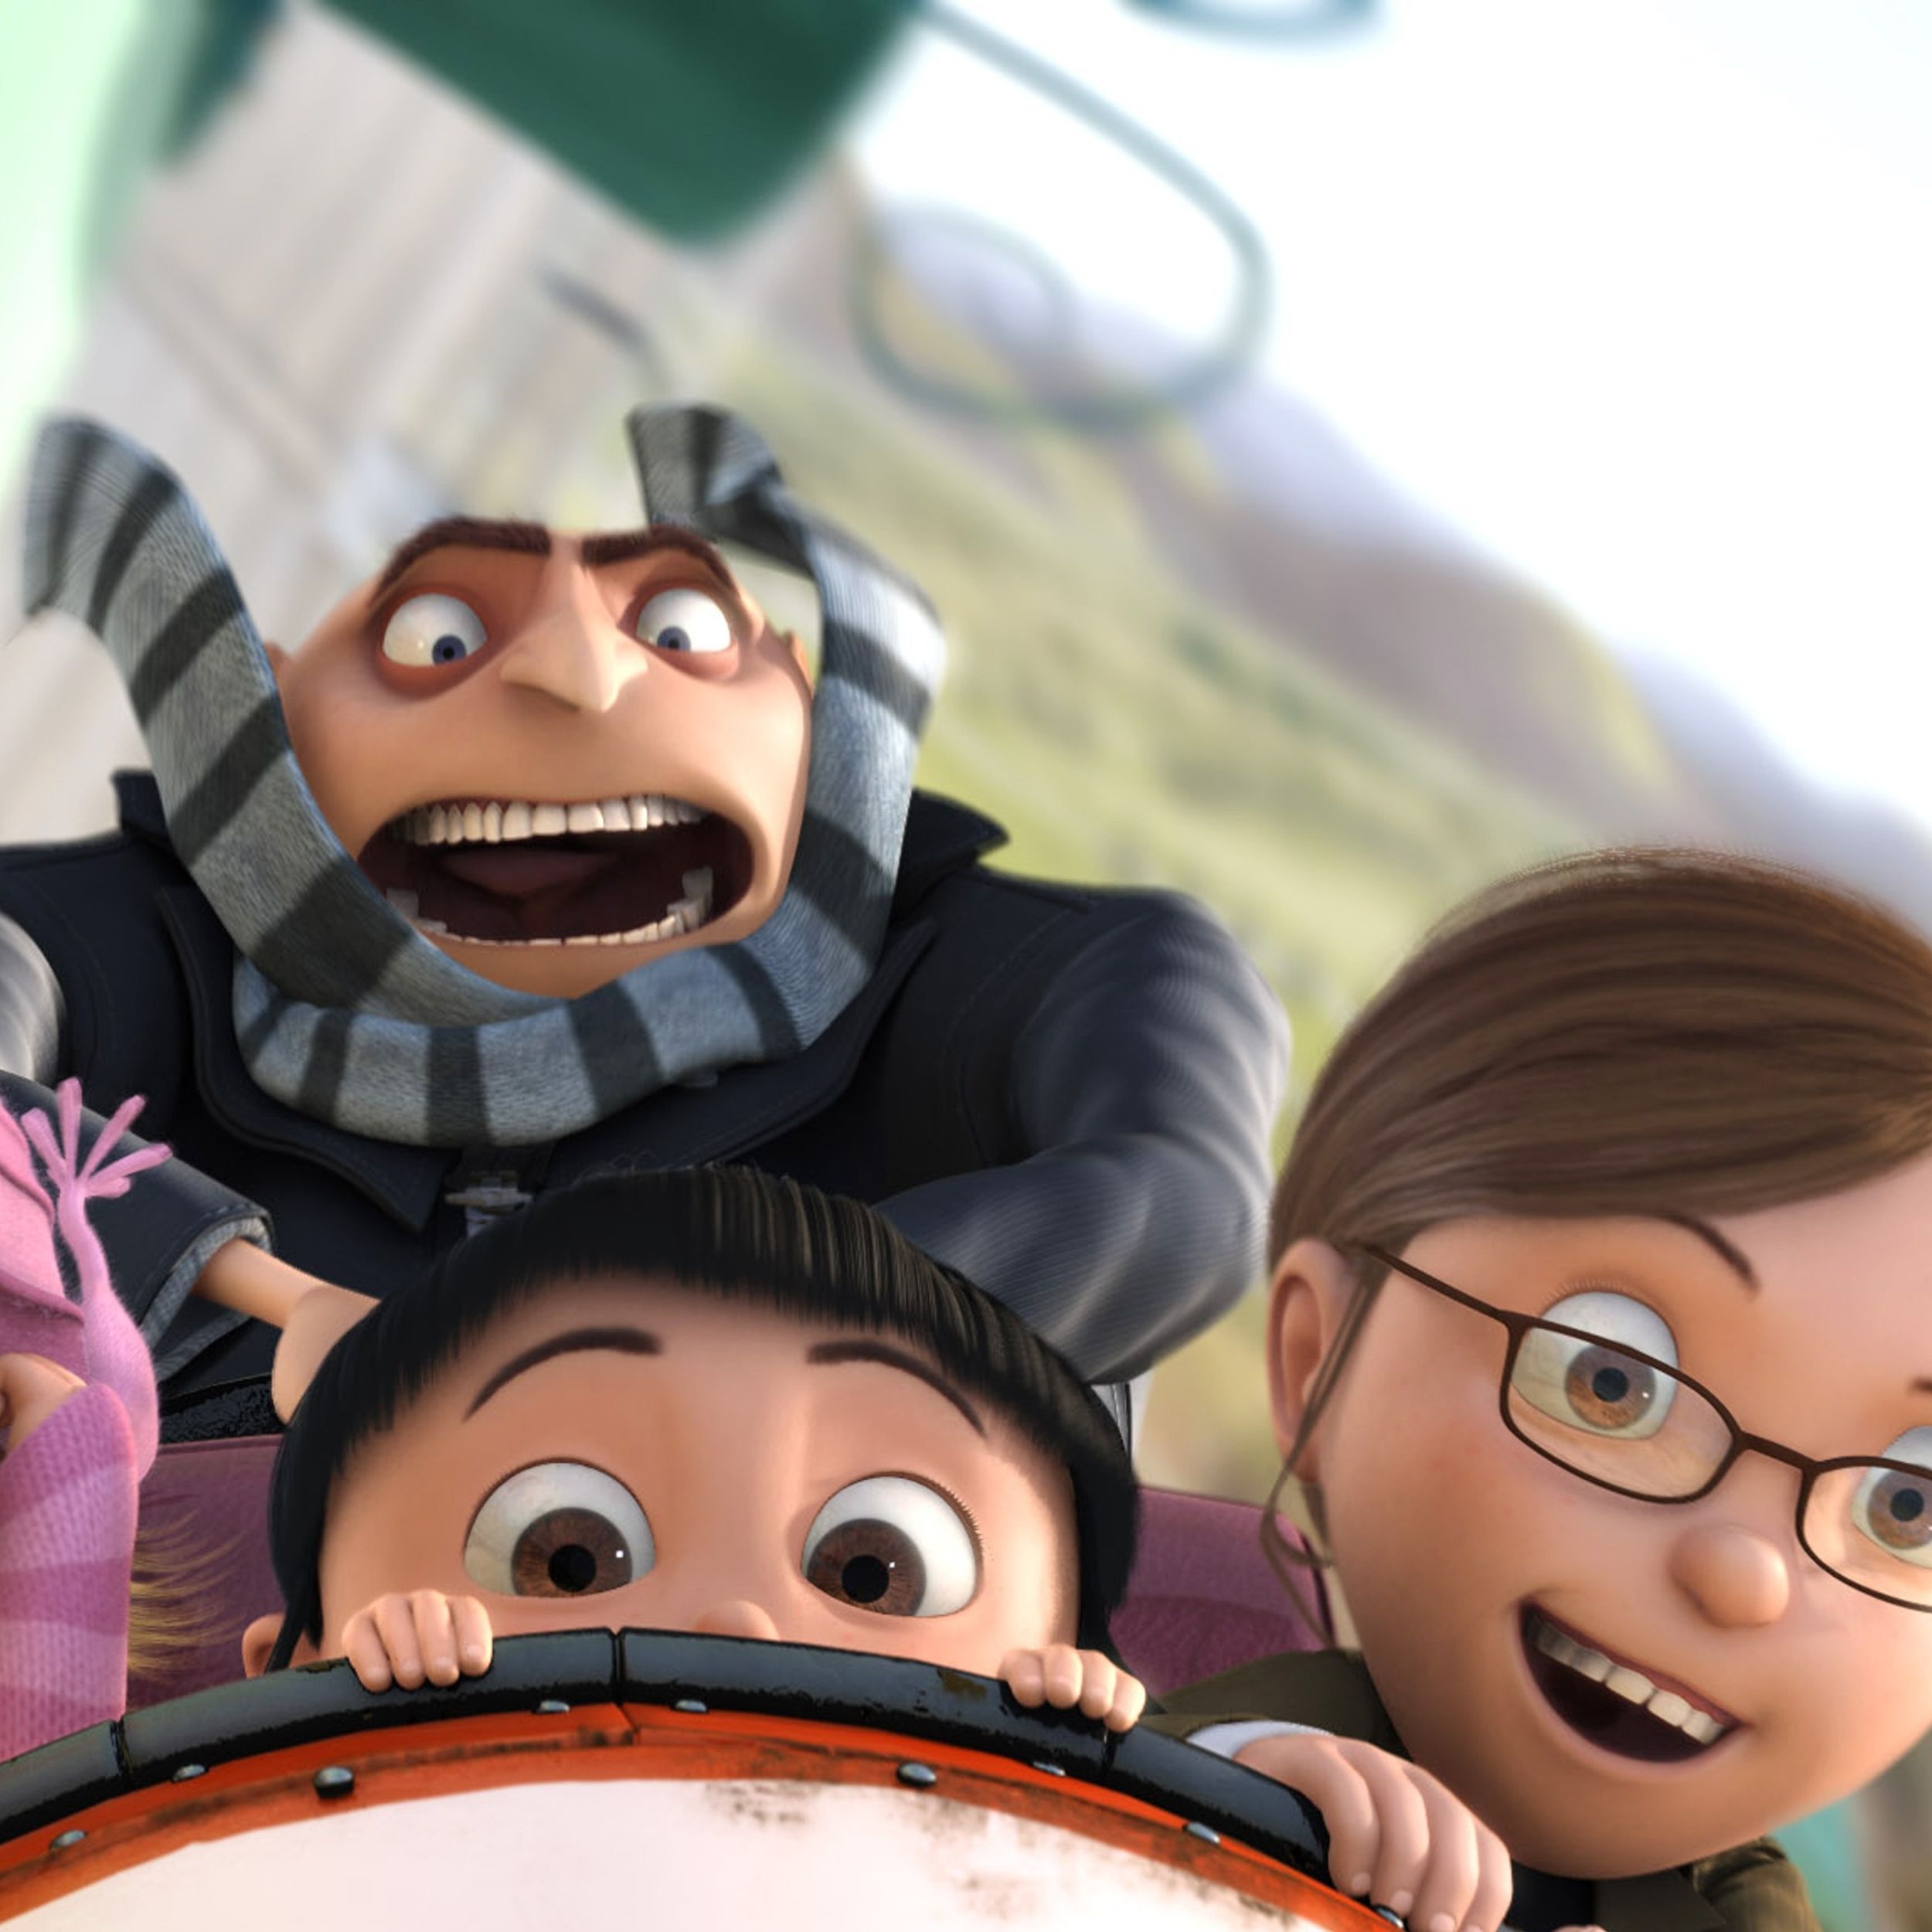 Despicable Me' funny, sweet | The Spokesman-Review